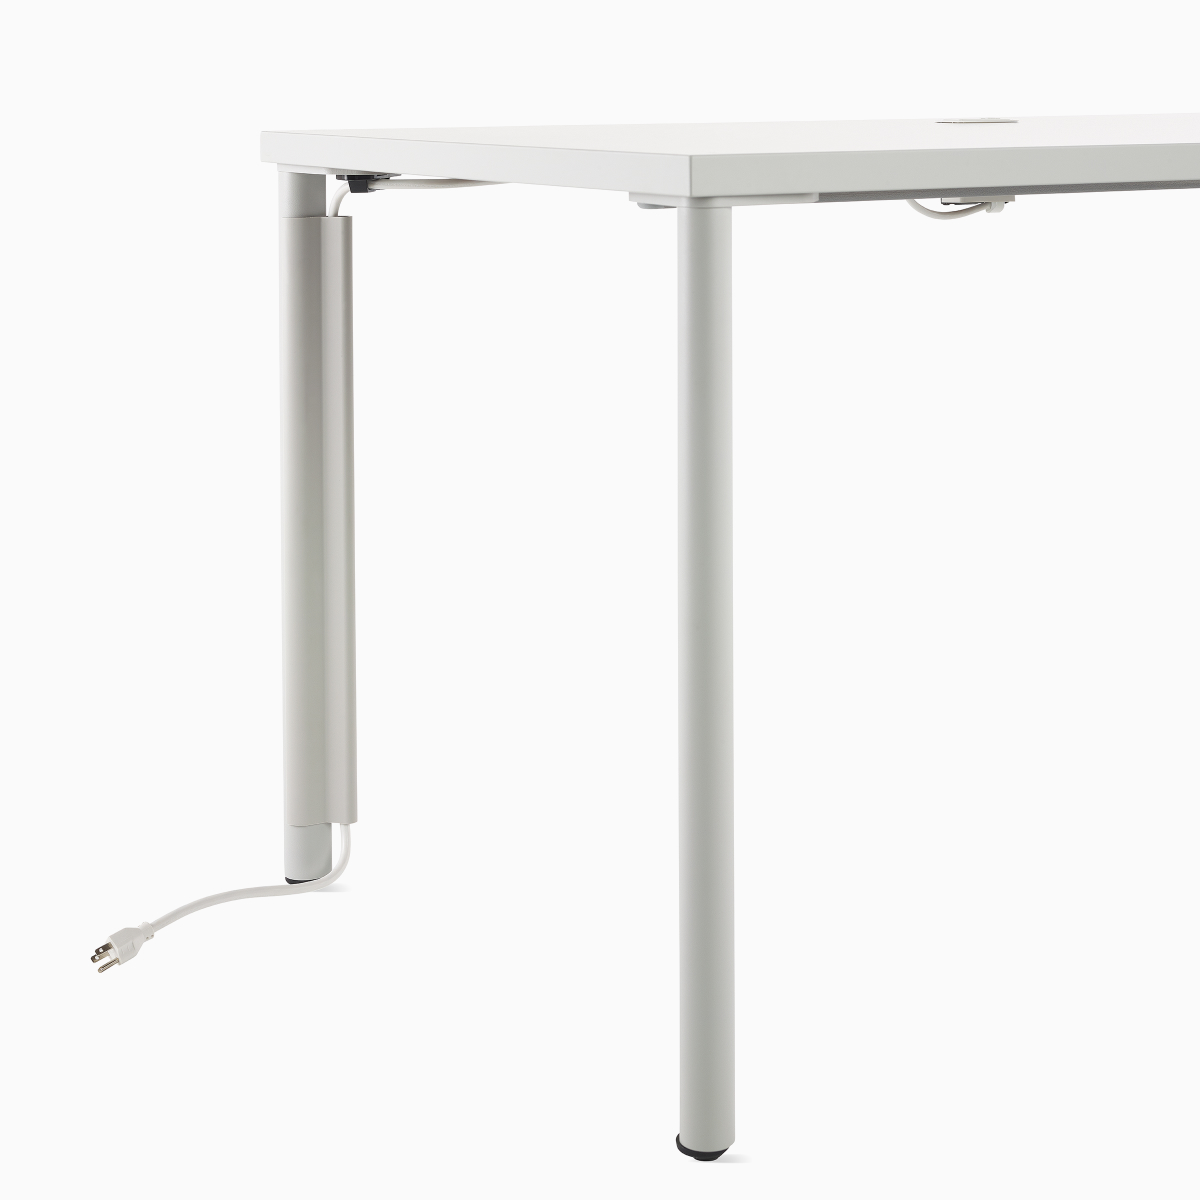 Close up image of a white OE1 Rectangular Table with cable routing through a leg cable manager to the floor.